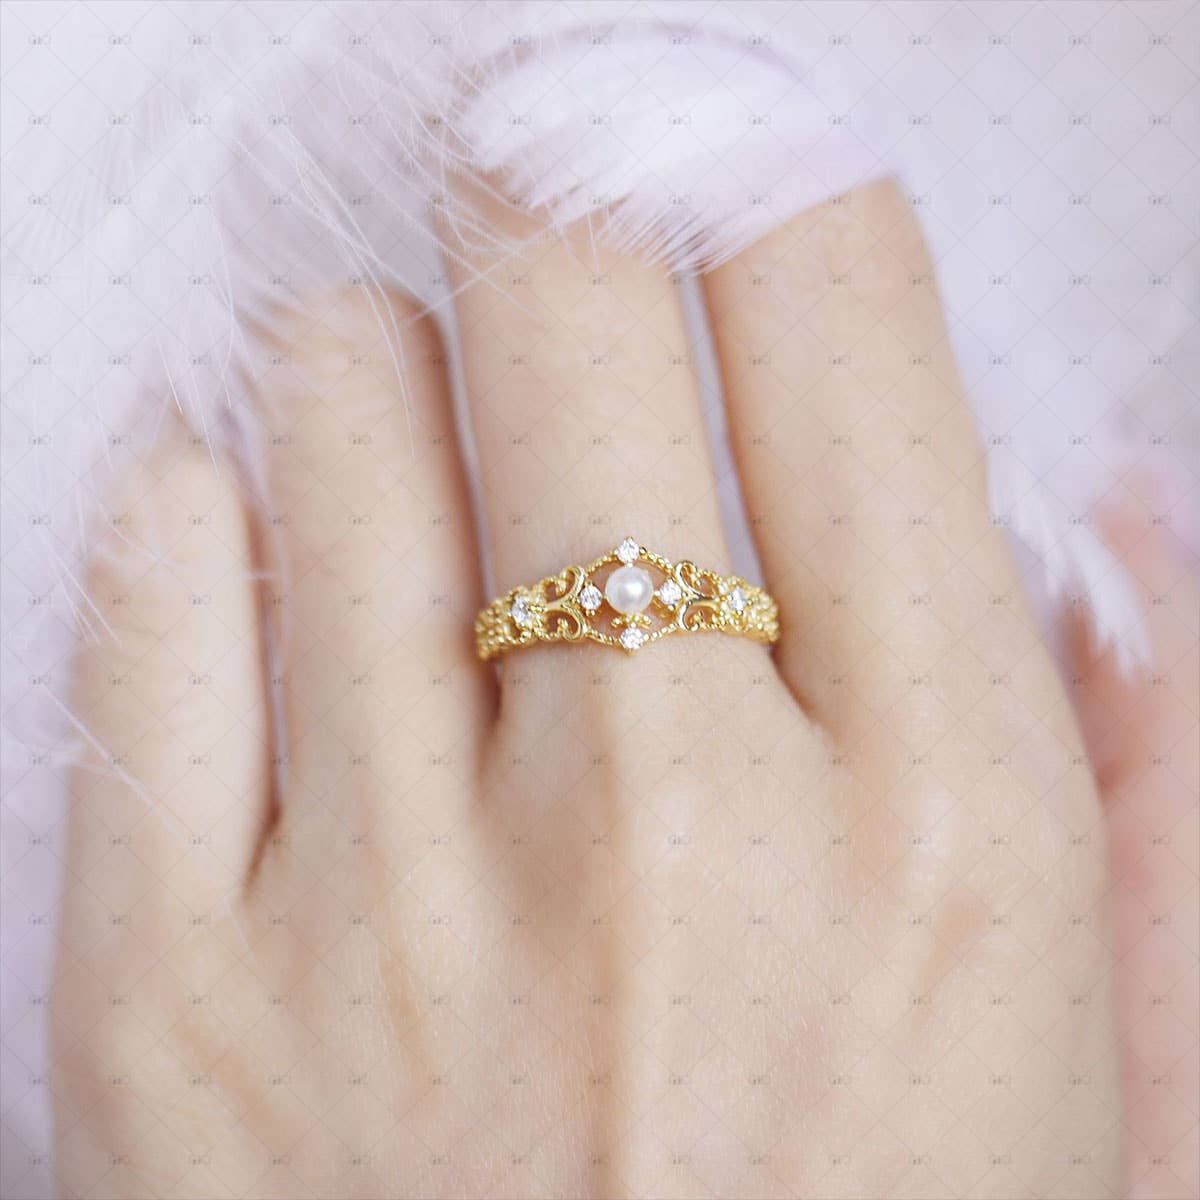 S925 Silver 18k Gold-plated Retro Hollow Pearl Ring